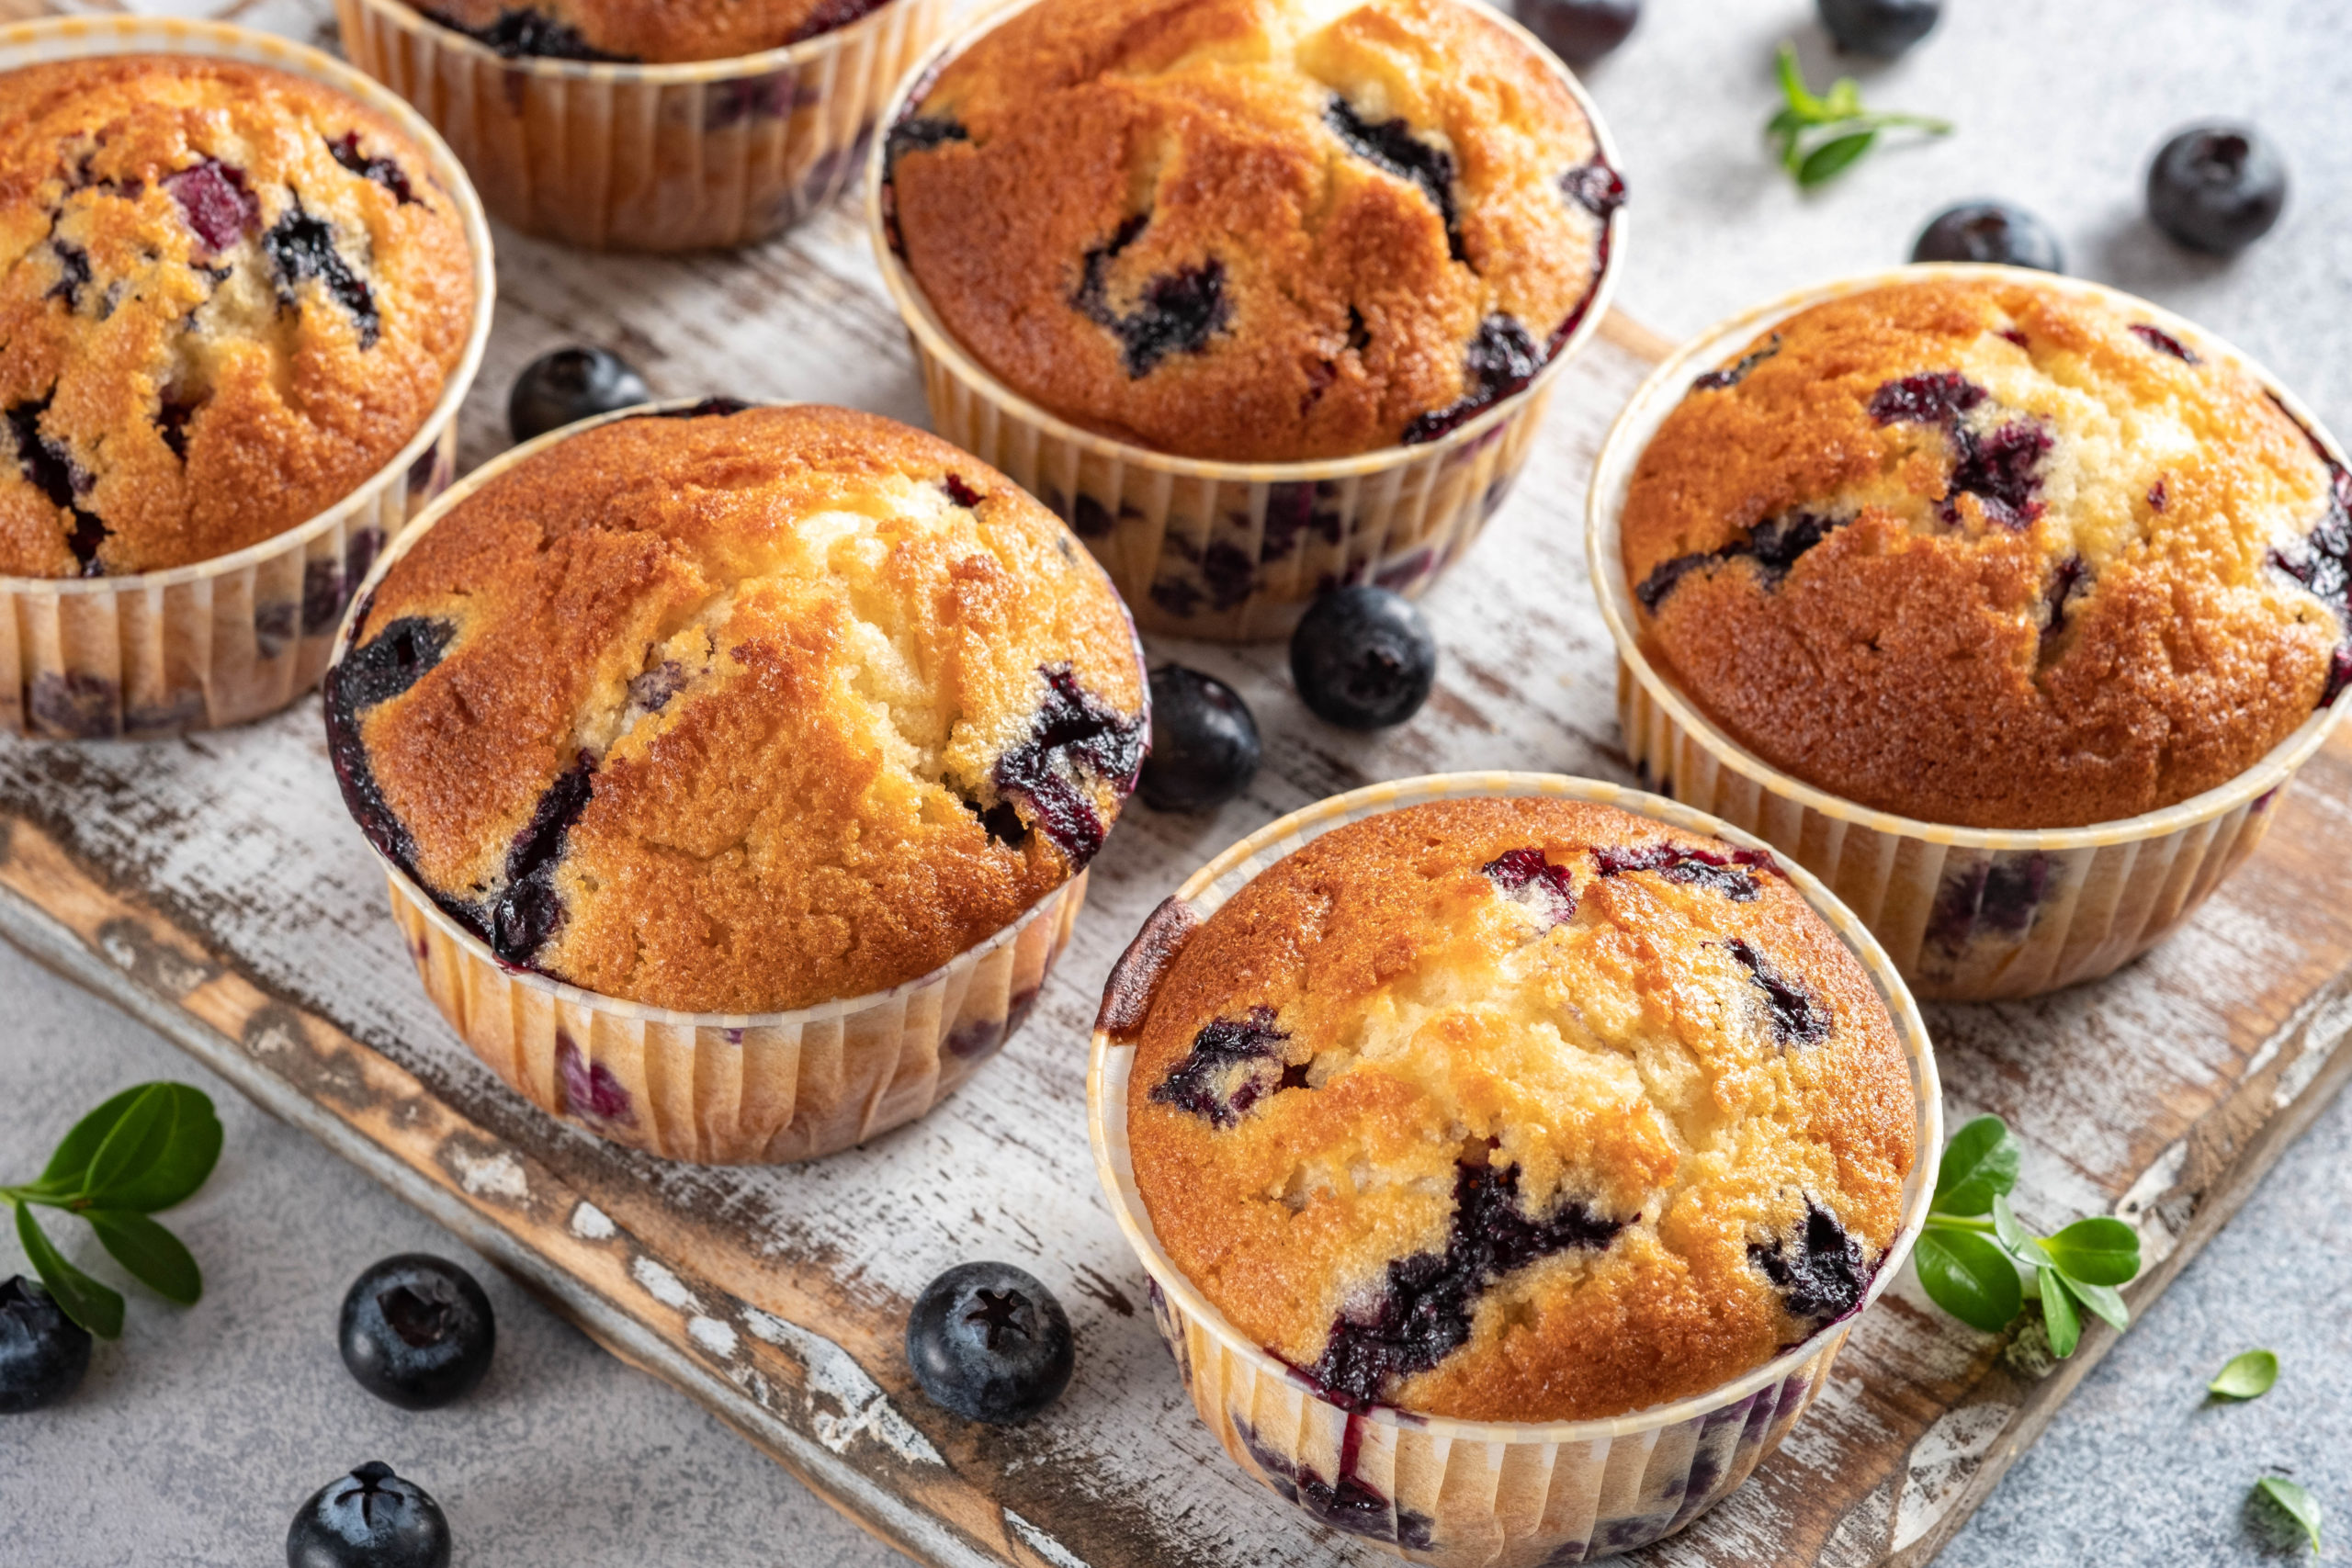 Sally's blueberry muffins